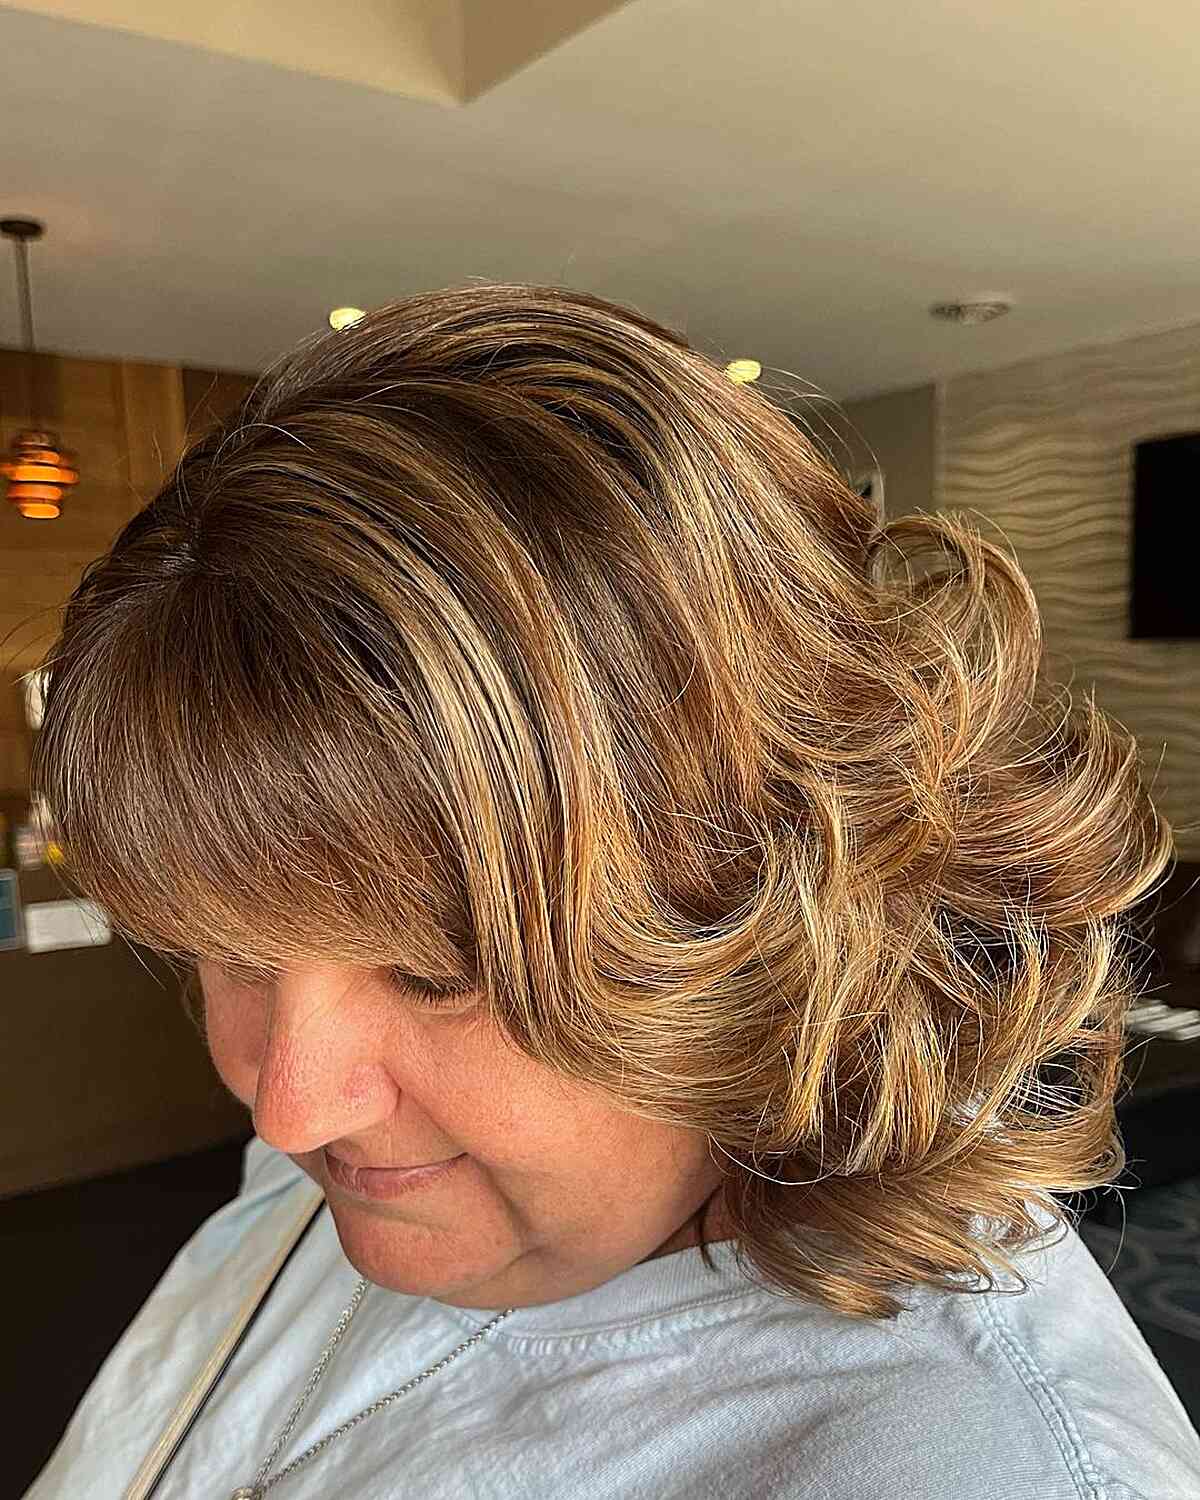 Dimensional Layered Cut with Curled Ends and Bangs for Plus-Size Older Ladies Over 50